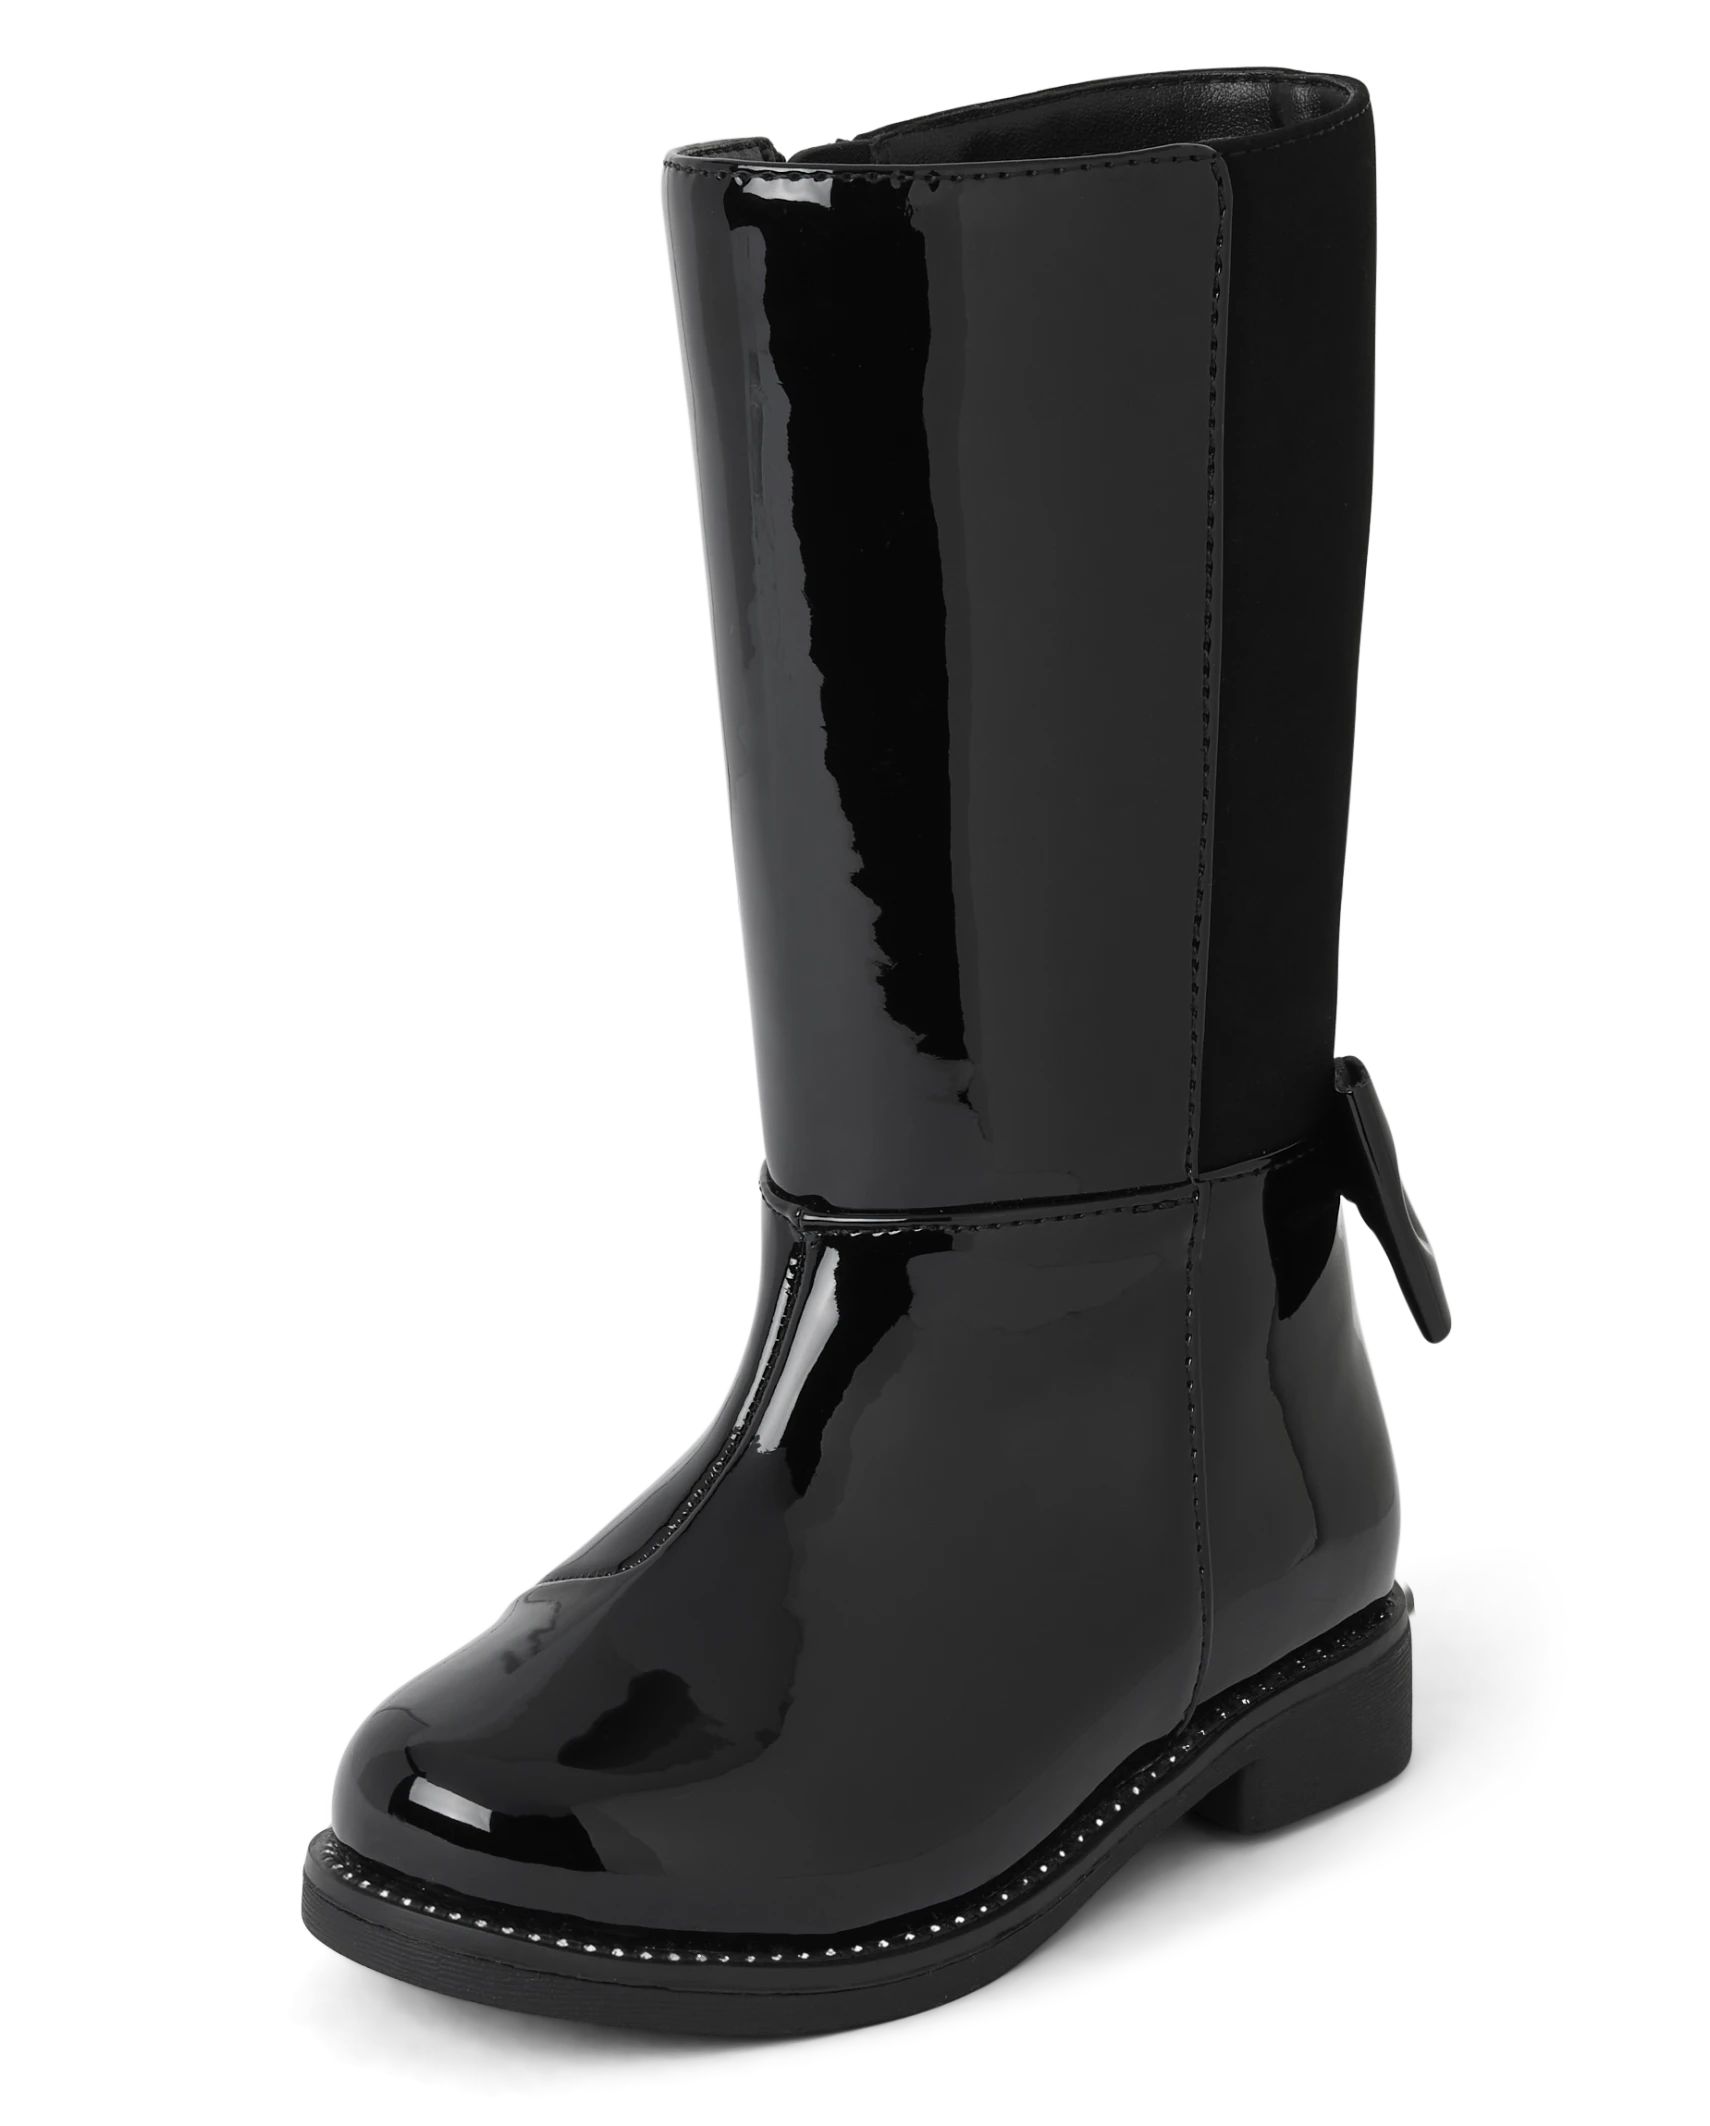 Toddler Girls Bow Faux Patent Leather Tall Boots | The Children's Place  - BLACK | The Children's Place